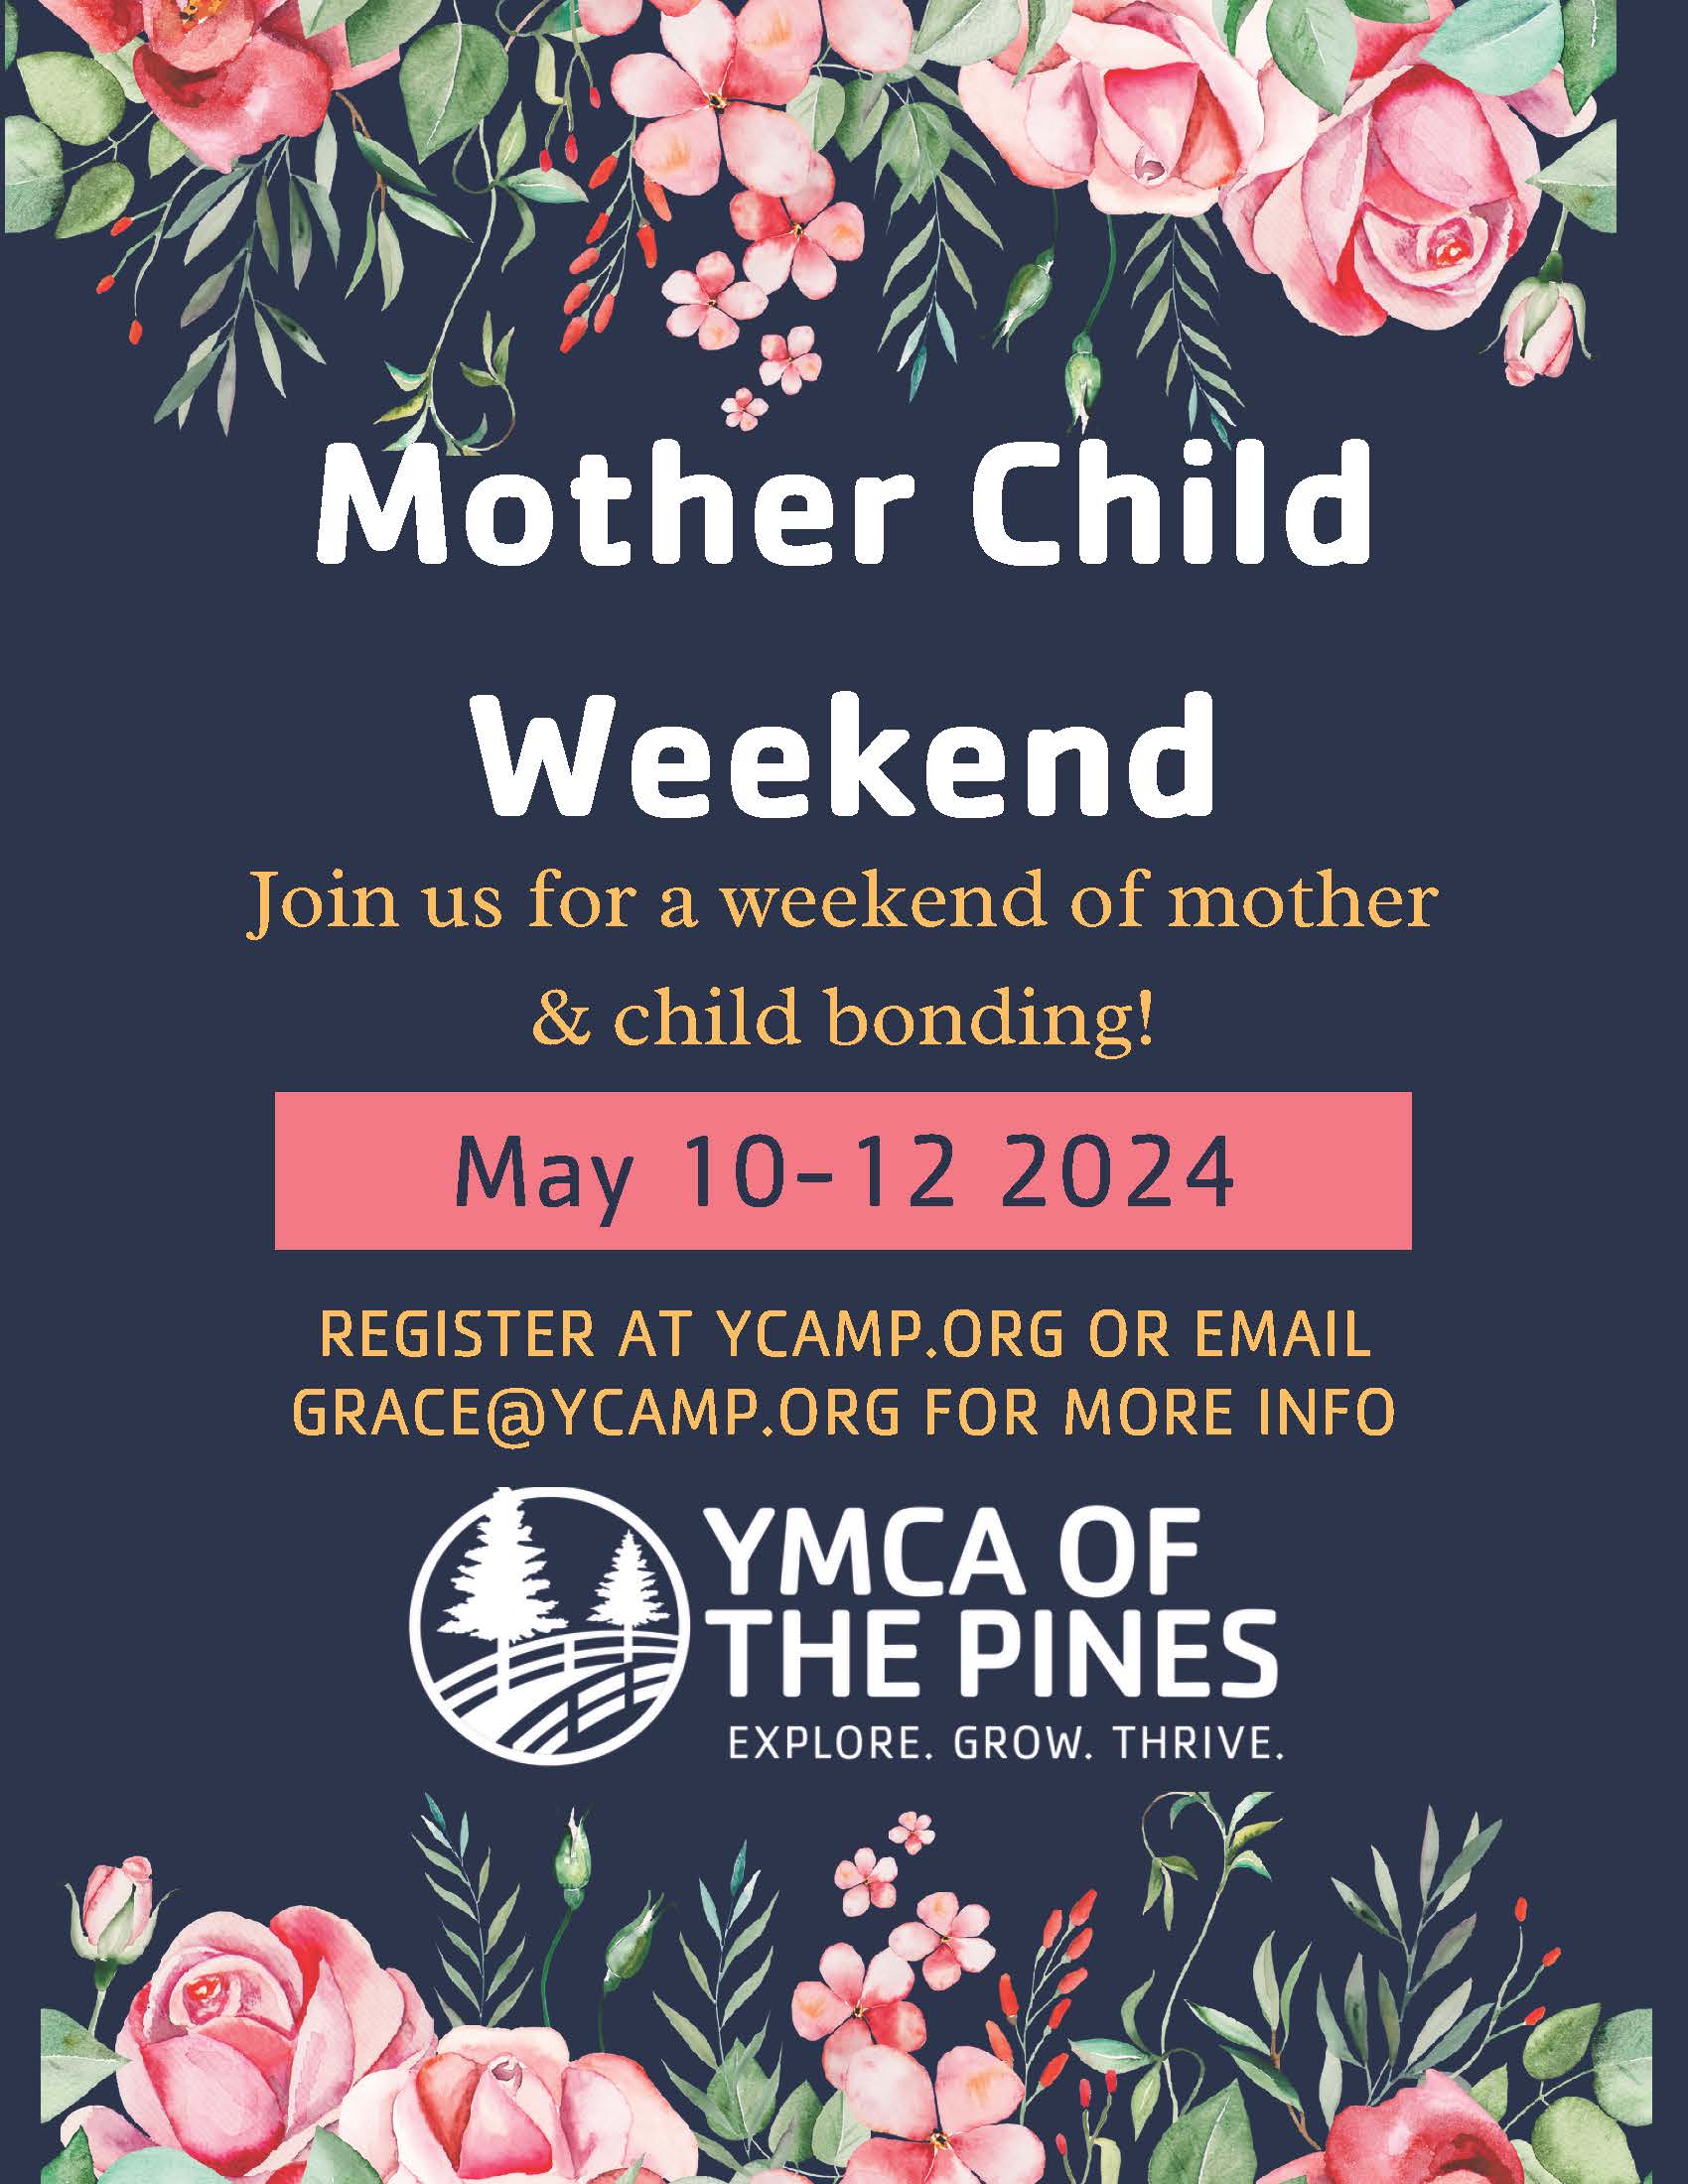 Spring Mother/Child Weekend @ YMCA of the Pines | Medford | New Jersey | United States